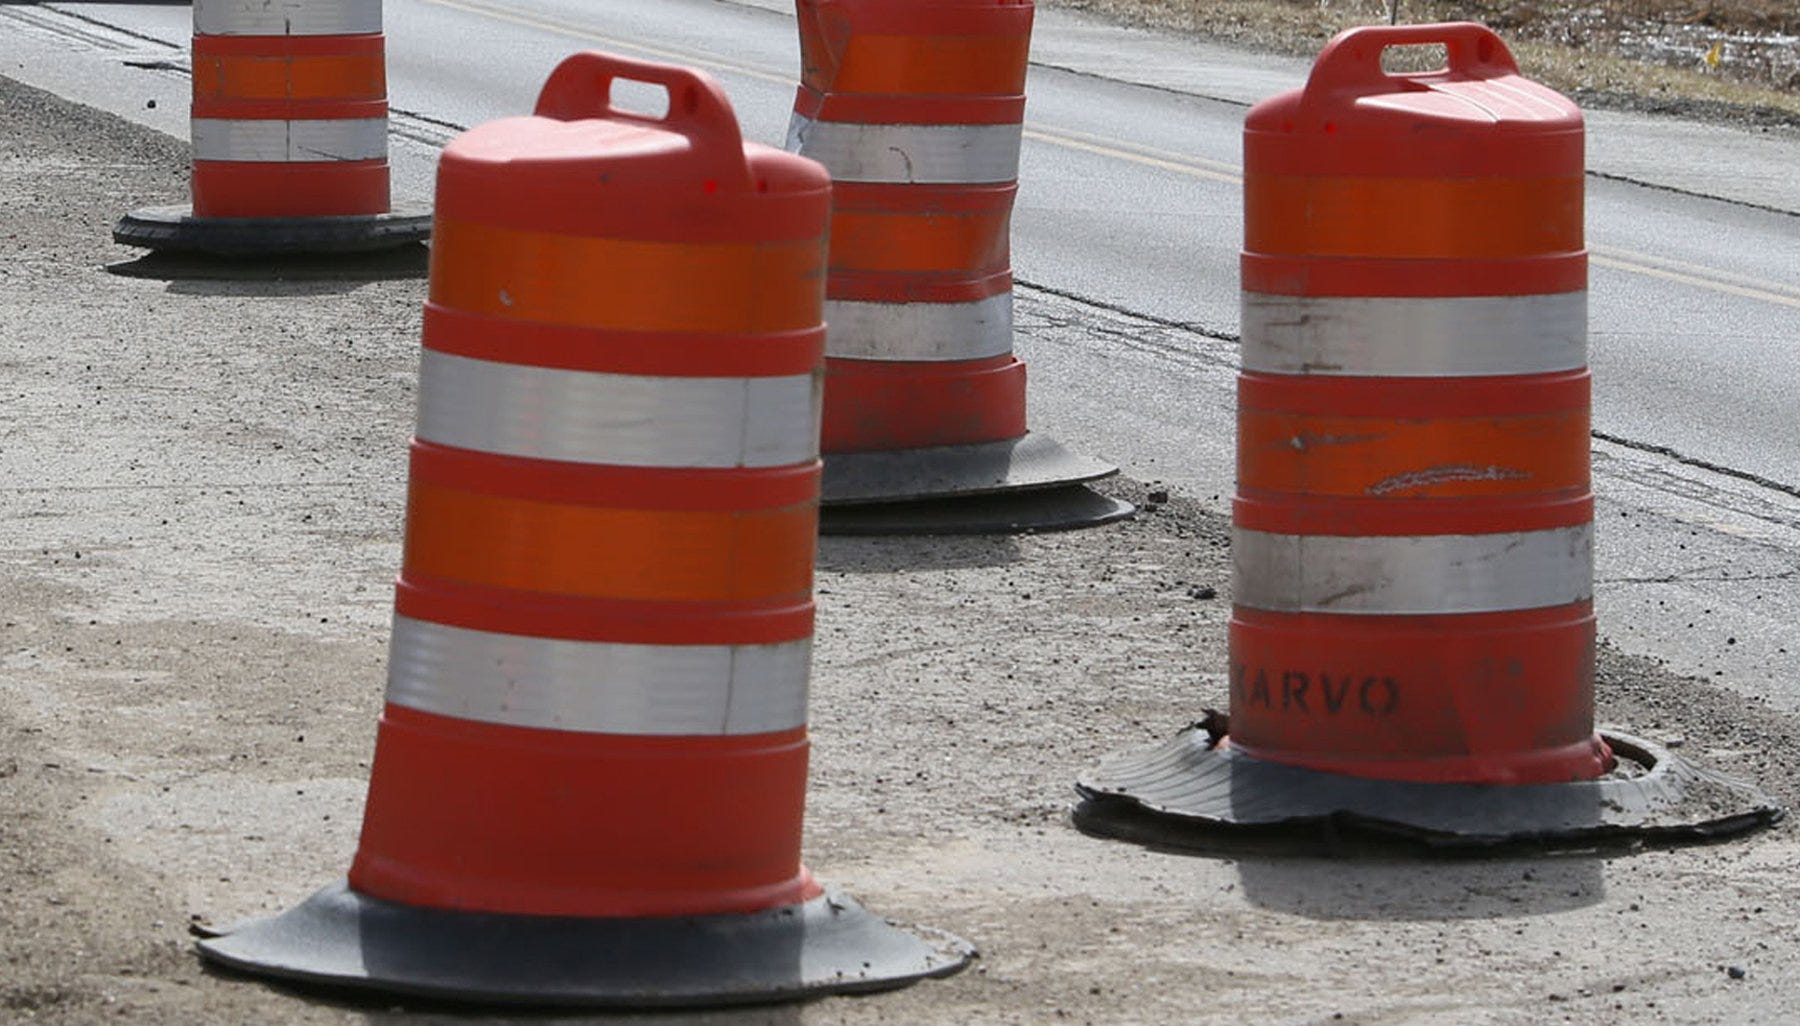 odot announces upcoming ramp, road closures in akron for i-76, i-77, other highways